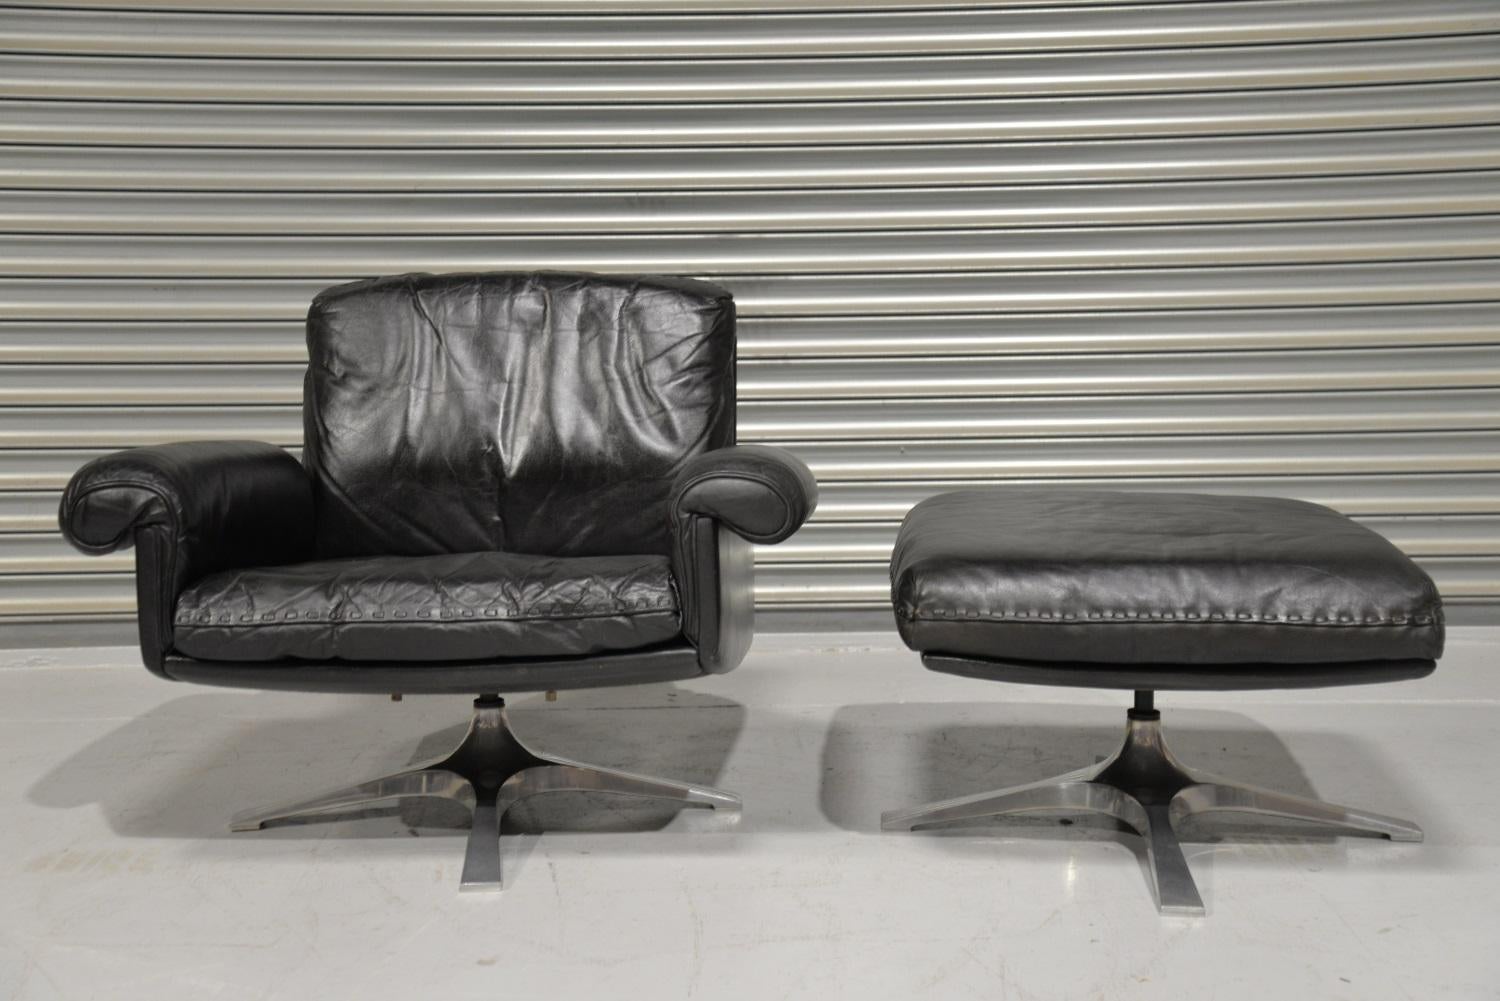 Discounted airfreight for our US and International customers (from 2 weeks door to door)

We are delighted to bring to you a vintage De Sede DS 31 lounge armchair with ottoman. Hand built in the 1970s by De Sede craftsman in Switzerland. This swivel